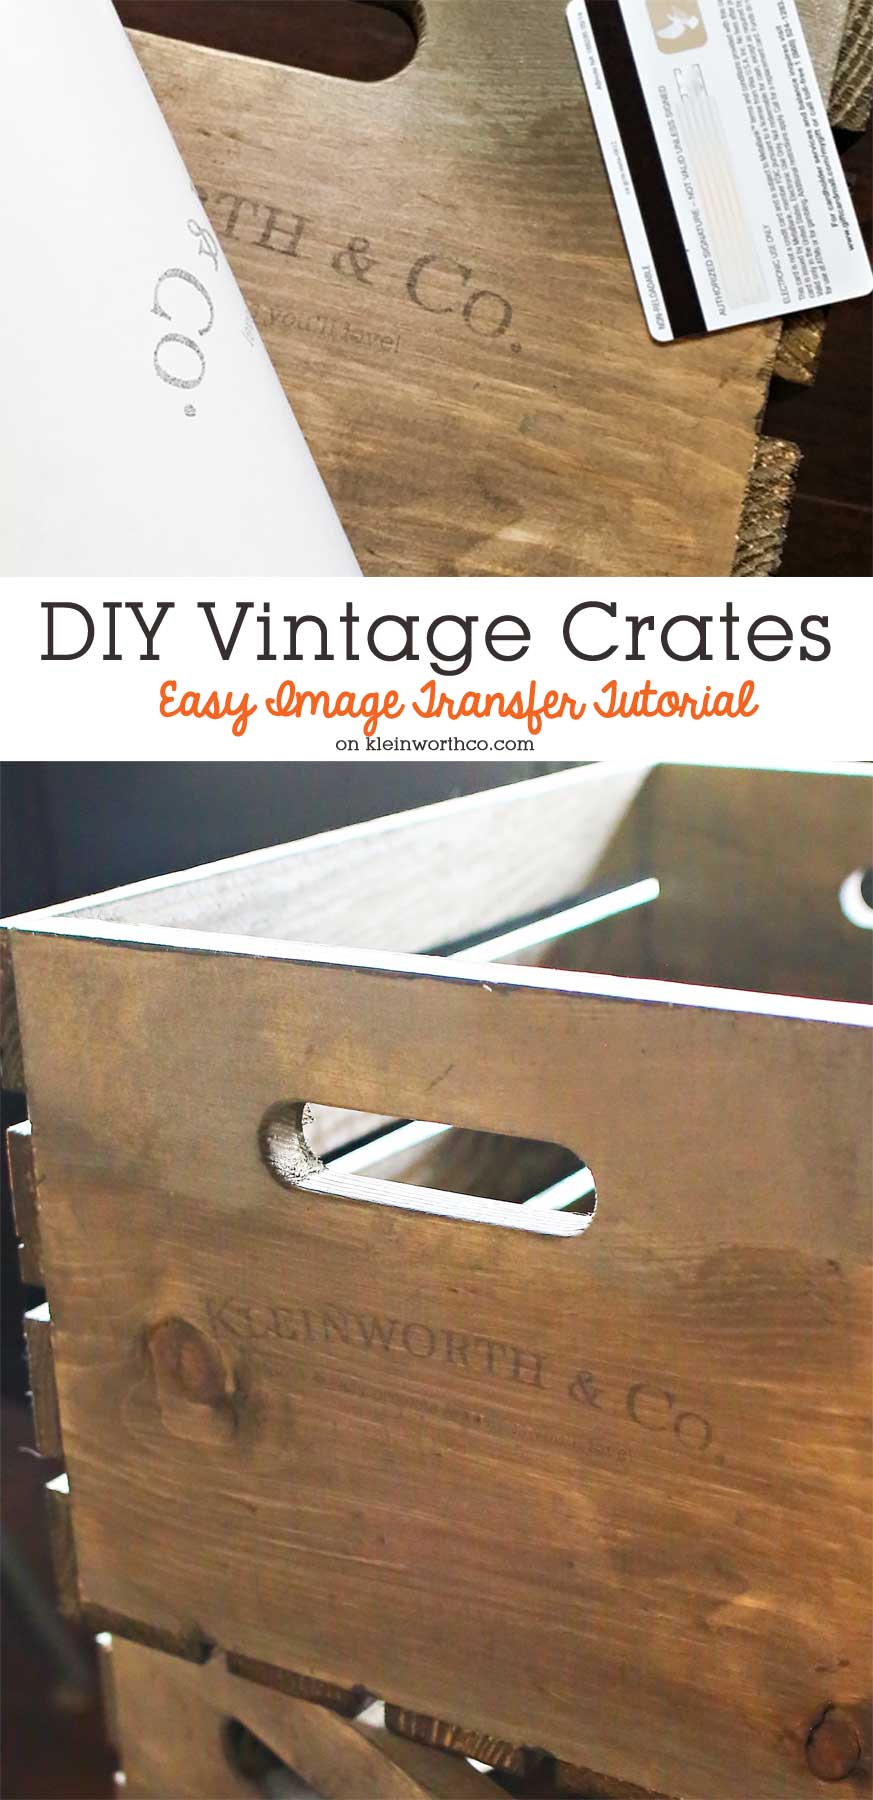 Anything with a vintage feel is so popular right now. If you go with modern farmhouse decor, that's even better with popular shows like Fixer Upper. You can create these DIY Vintage Crates with this Easy Image Transfer Tutorial using wax or freezer paper. It's a simple DIY that easily gives that farmhouse look.